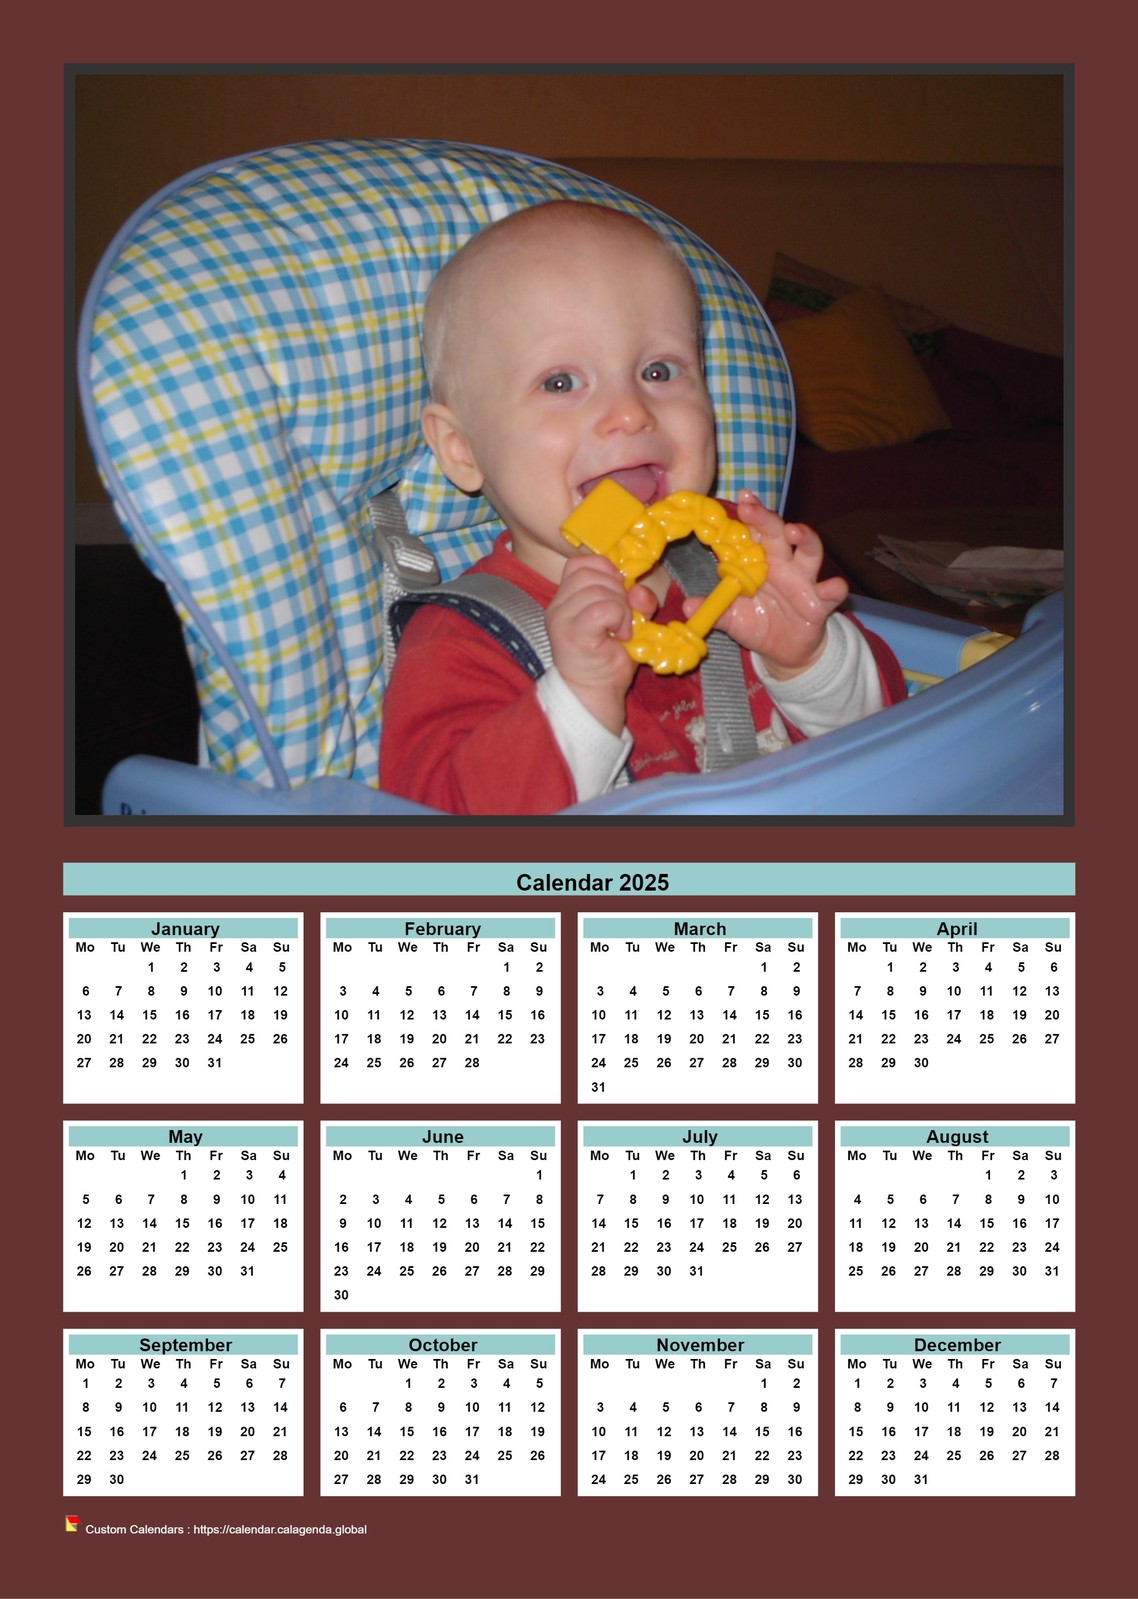 Calendar 2025 annual to print with family photo